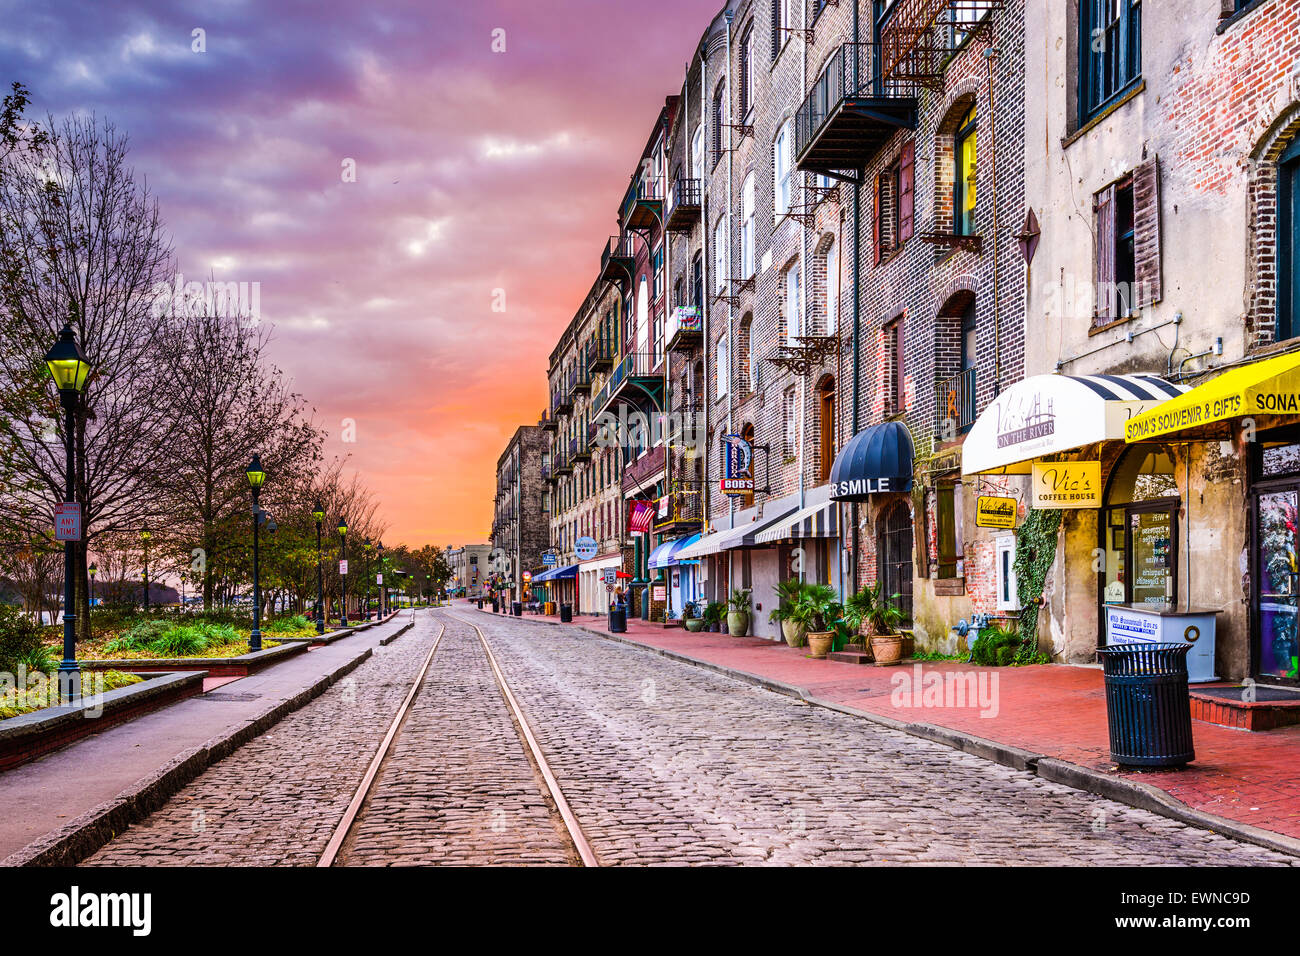 Shops and restaurants line River Street. The historic street is the center of nightlife in the city. Stock Photo